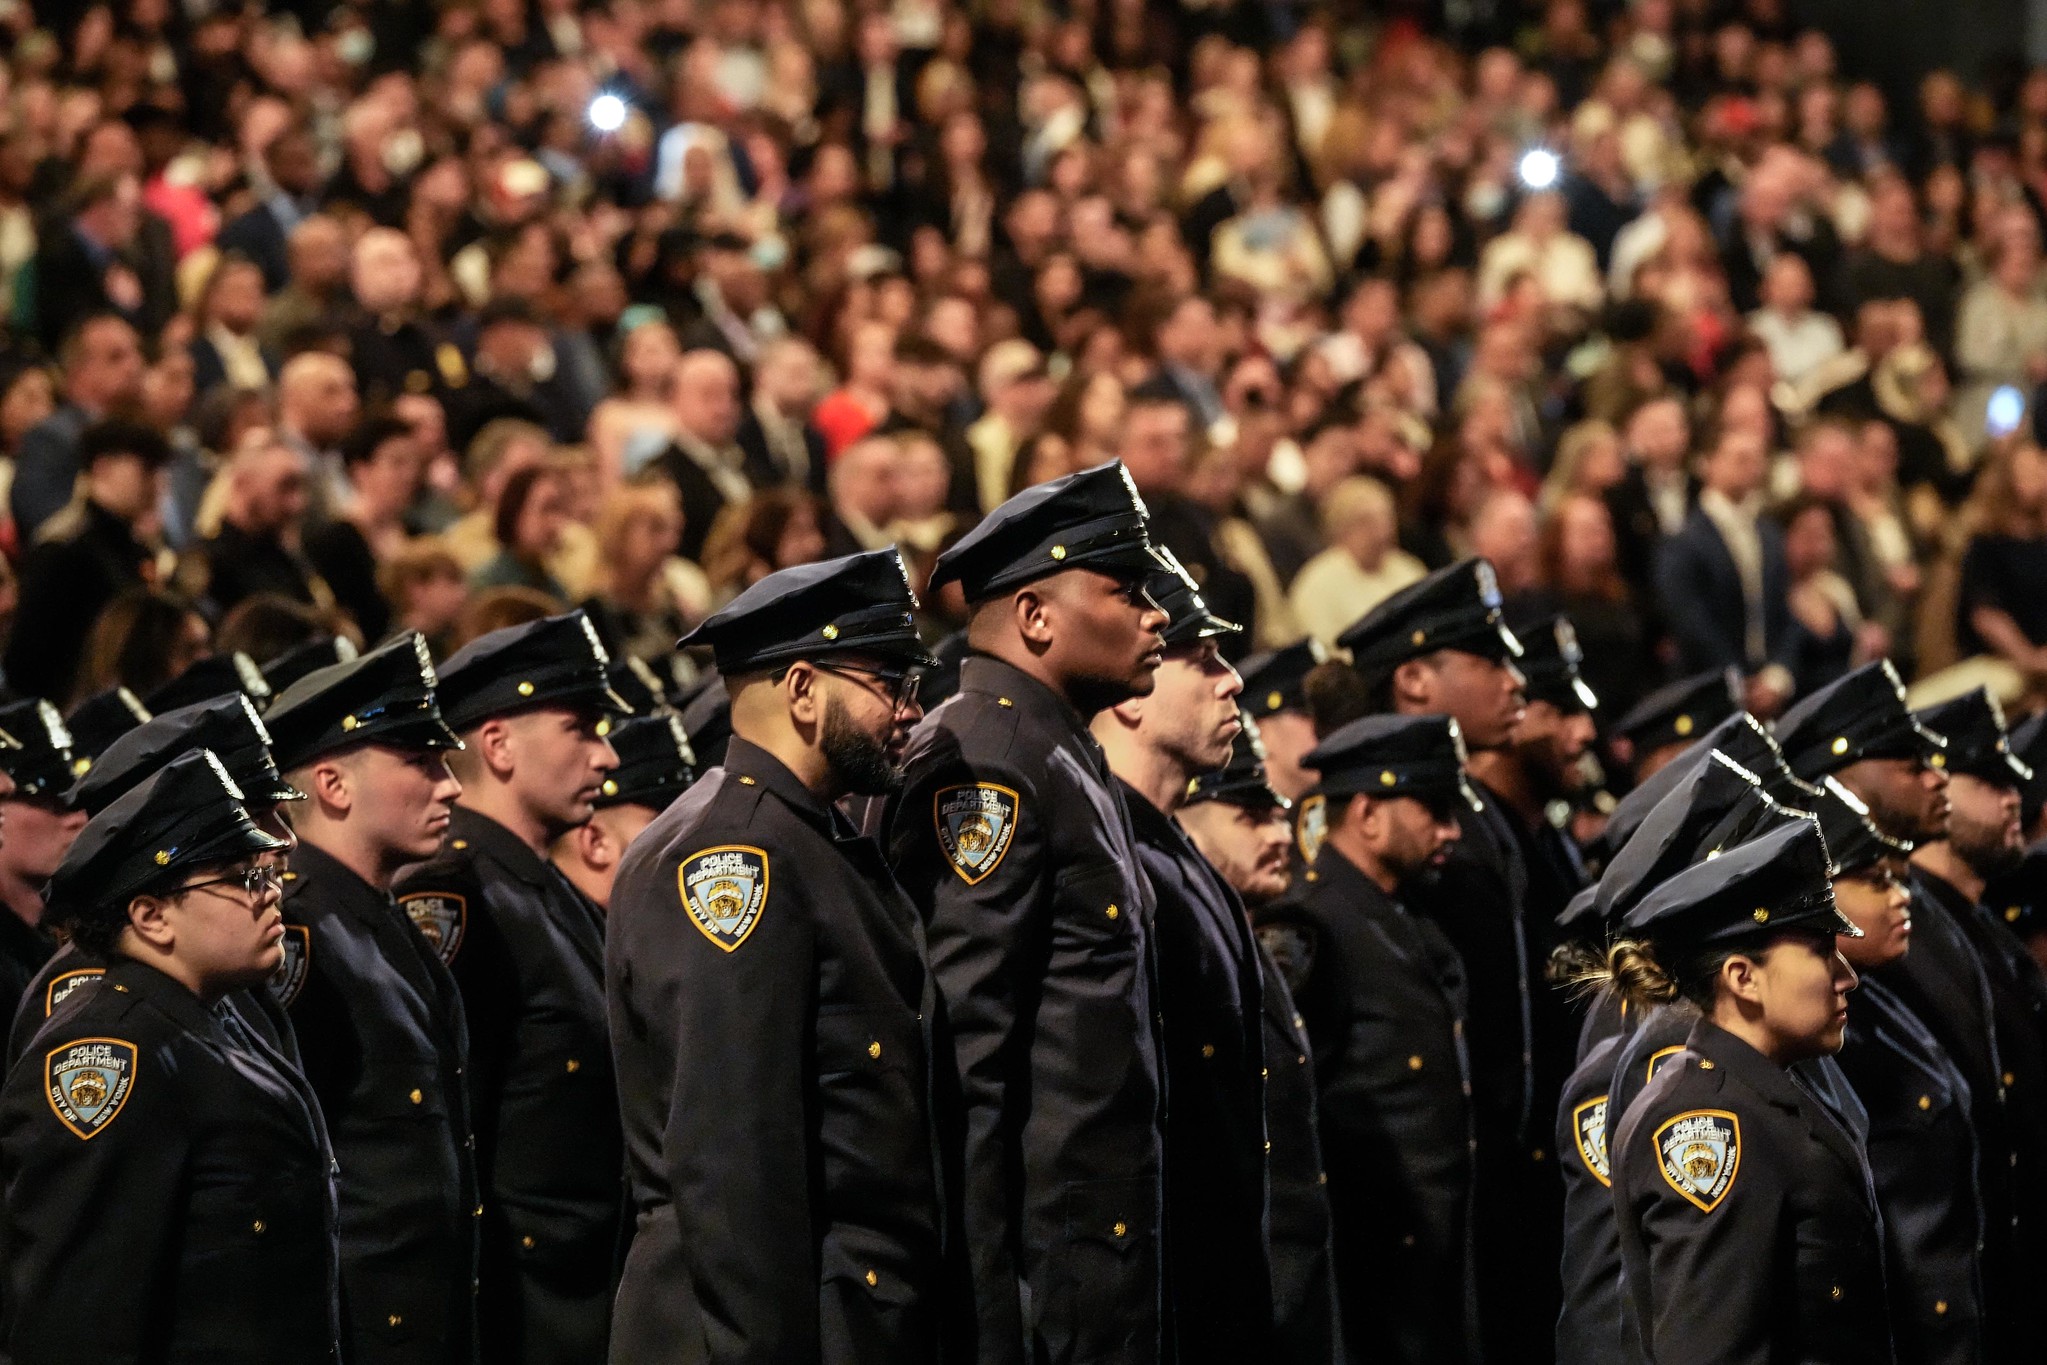 Autism training required for NYPD approved by City Council